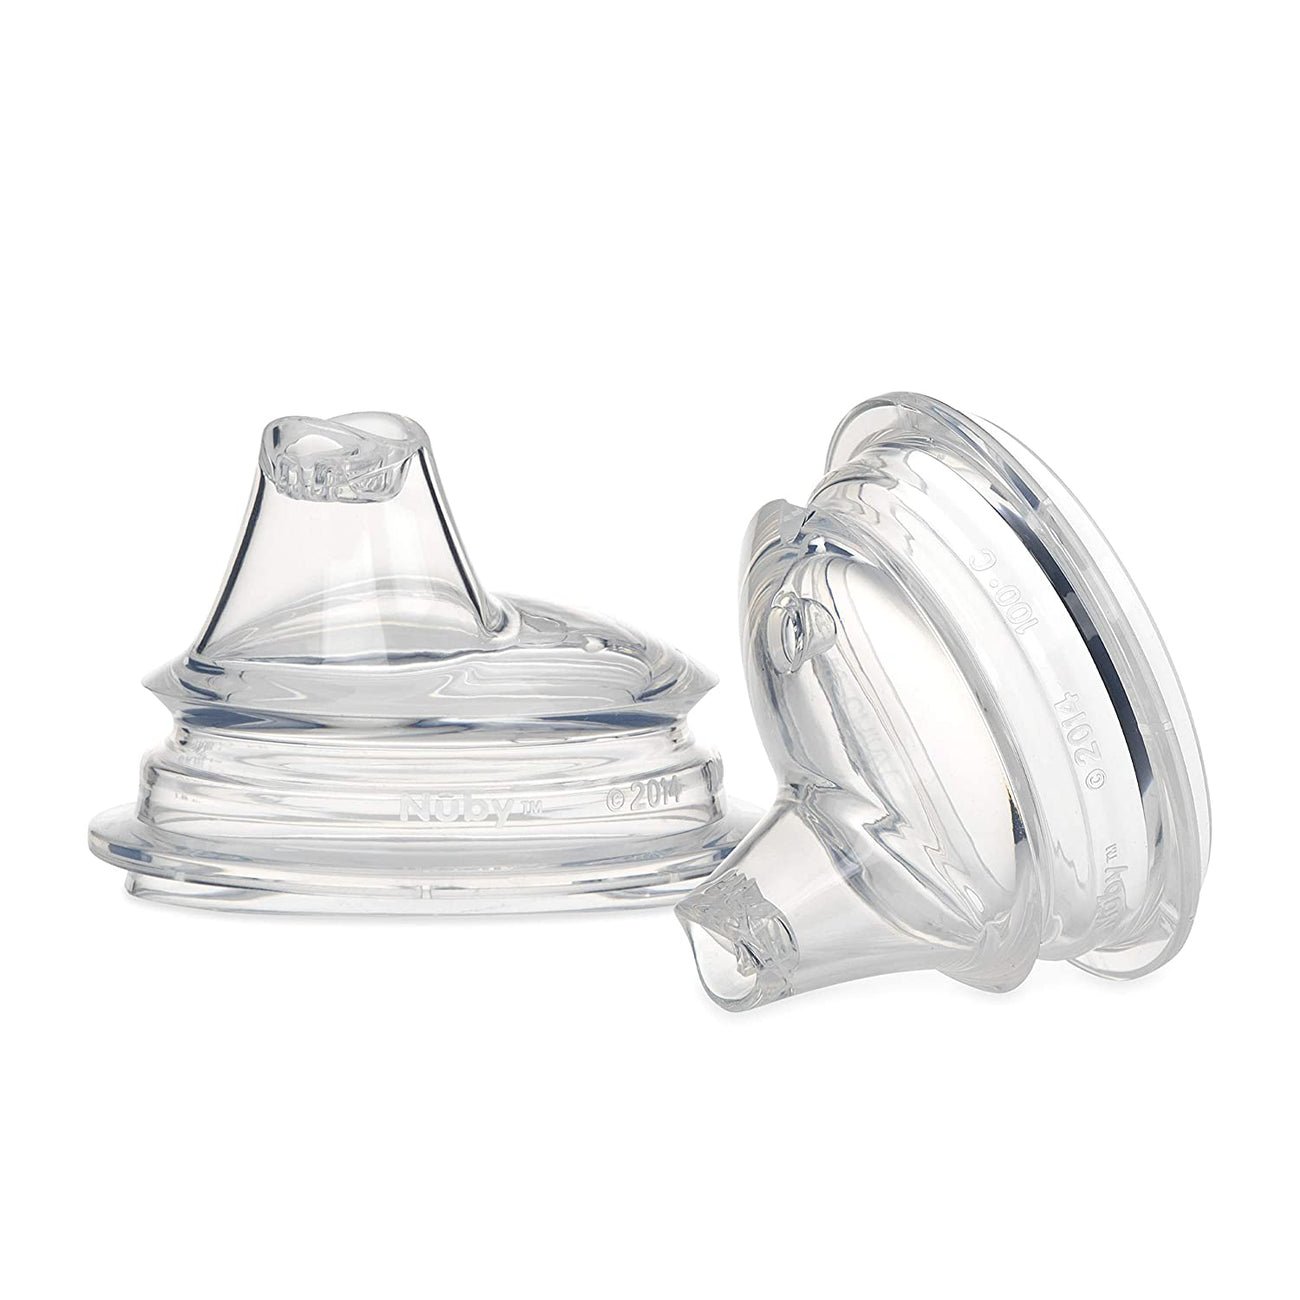 Comfort Replacement Spout - 2 pack - Nuby US